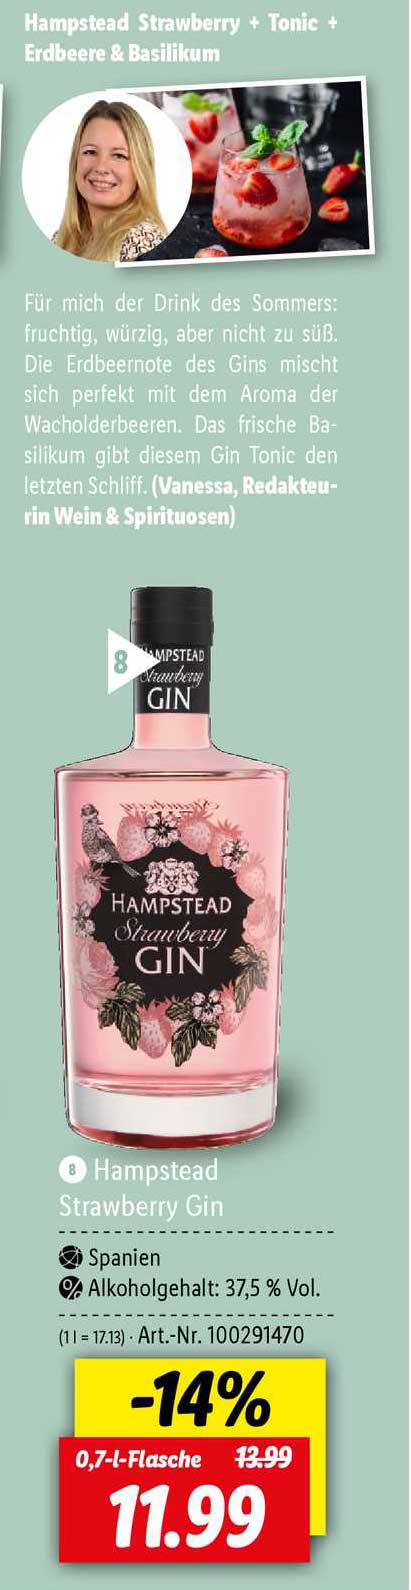 Hampstead Strawberry Gin Angebot bei Lidl